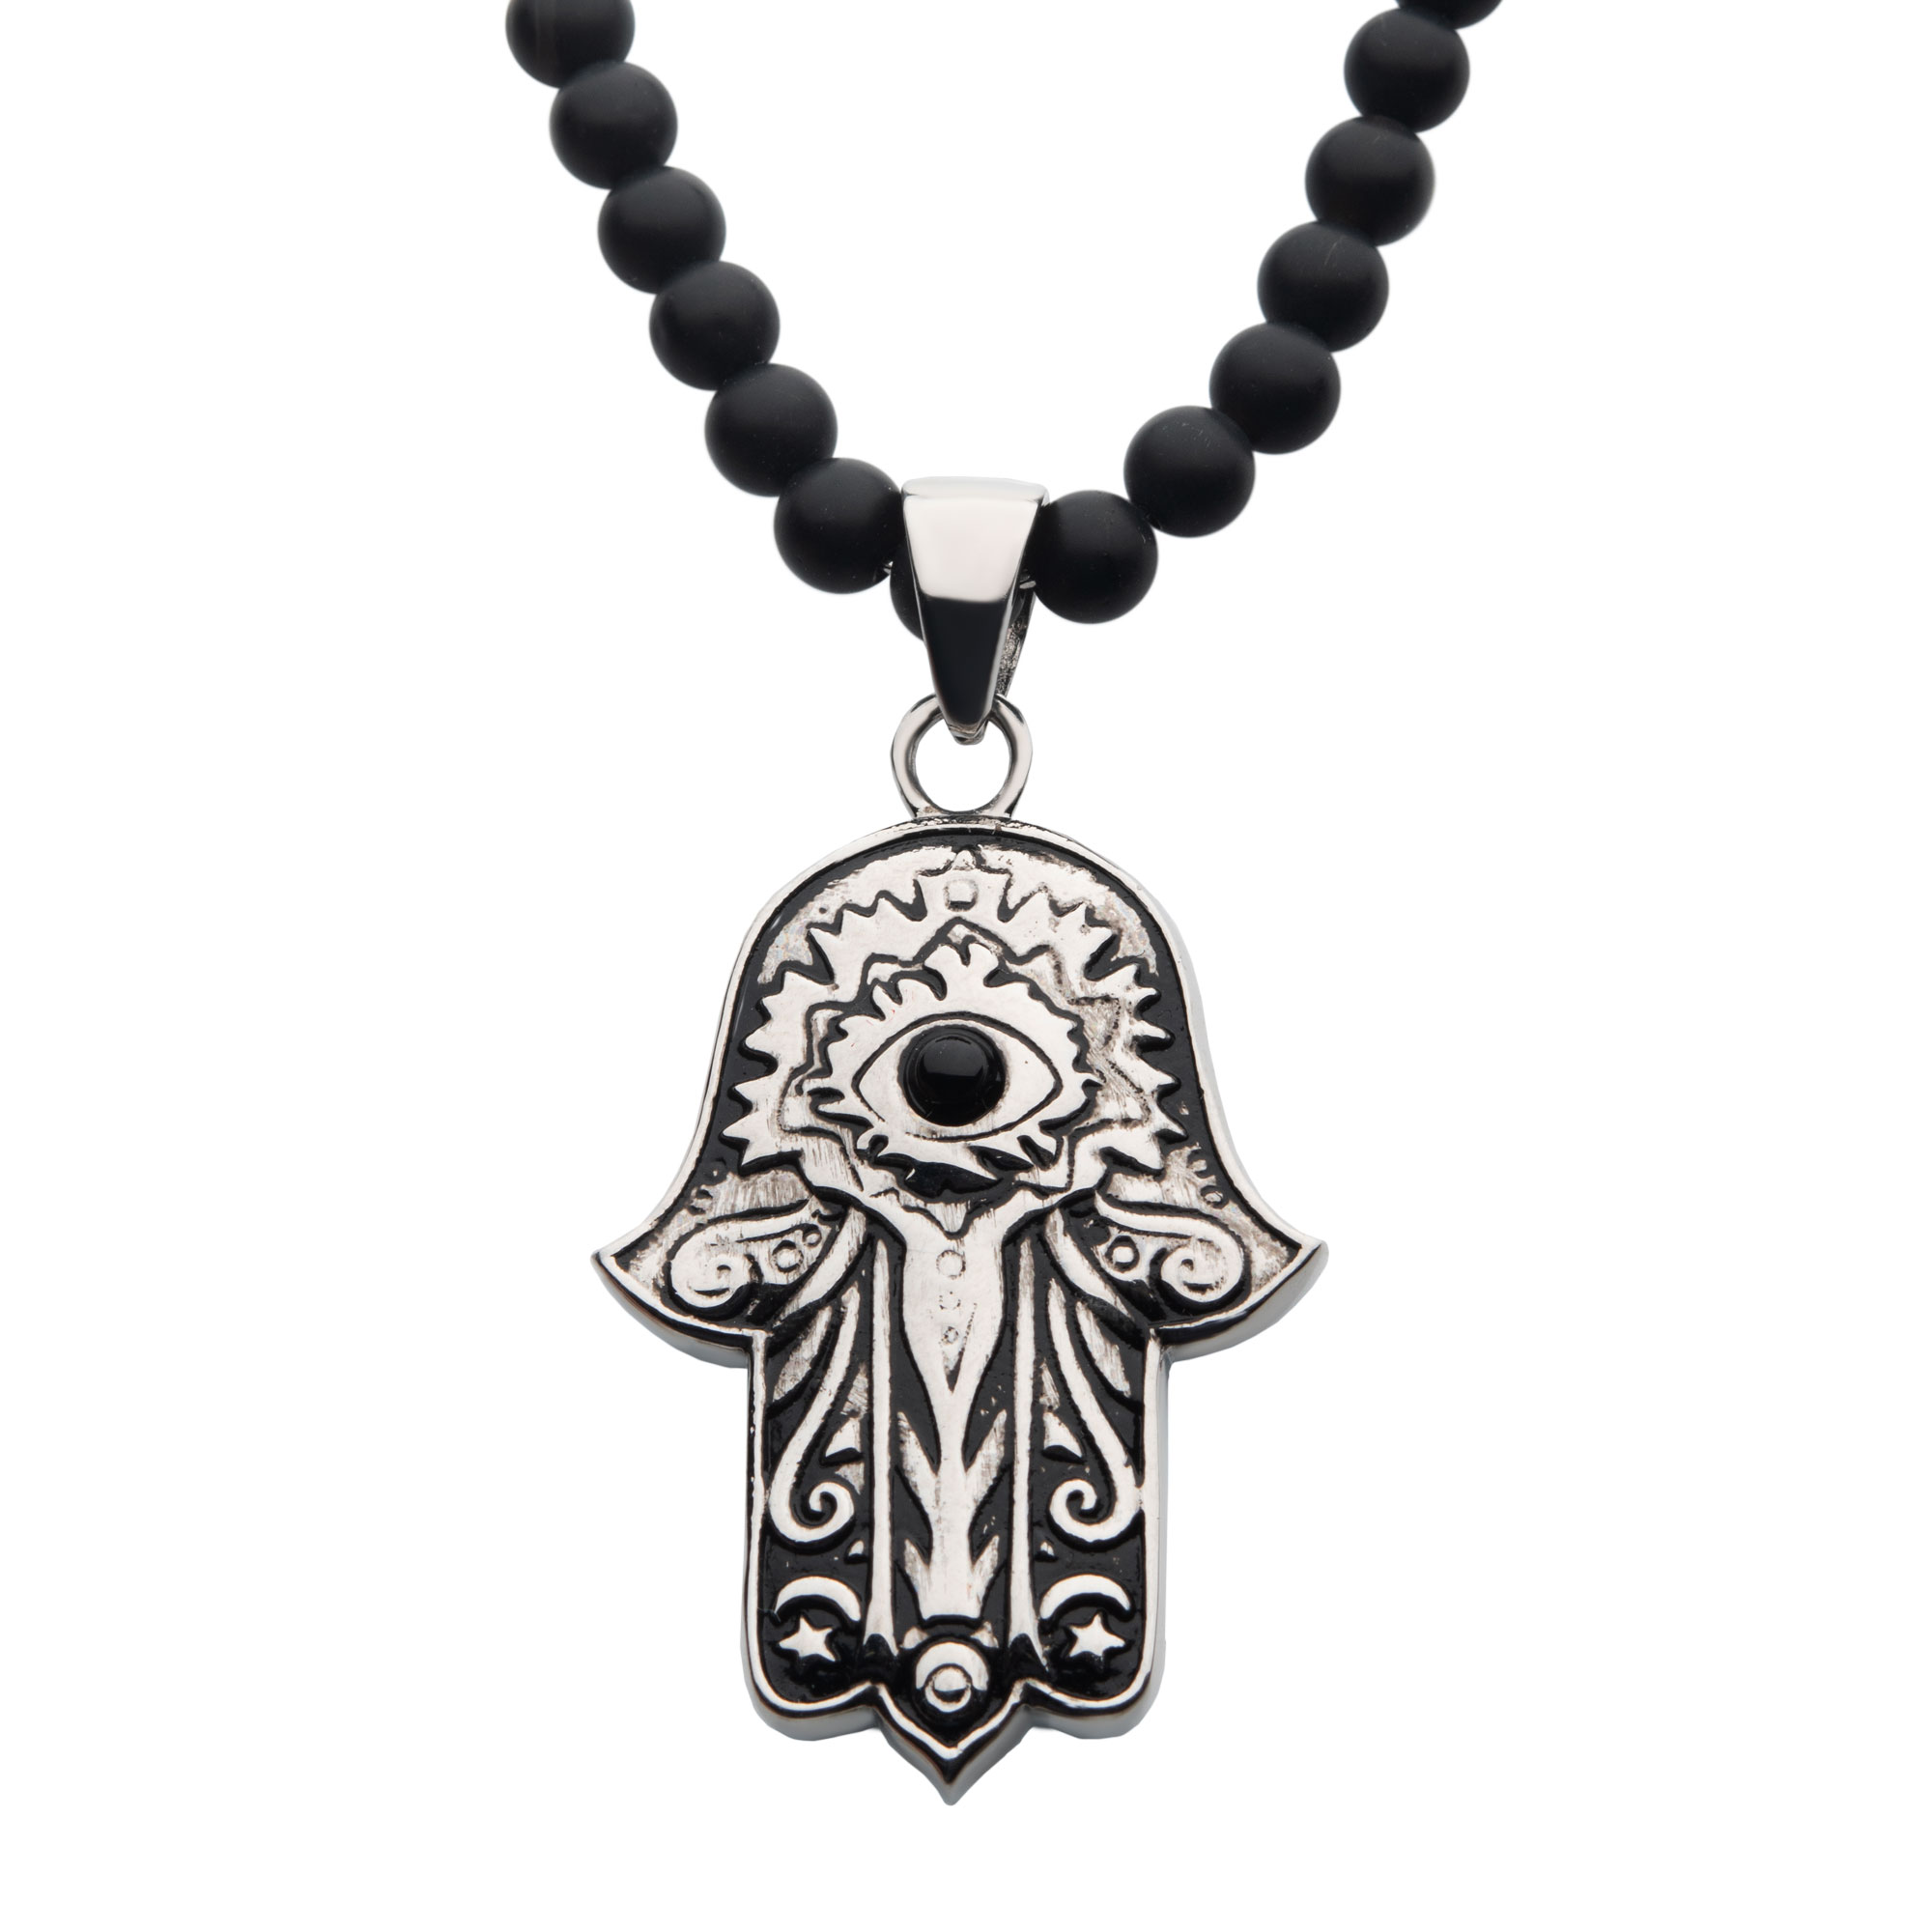 Stainless Steel with Centerpiece Black Agate Stone Hamsa Pendant, with Black Agate Stone Bead Necklace Enchanted Jewelry Plainfield, CT